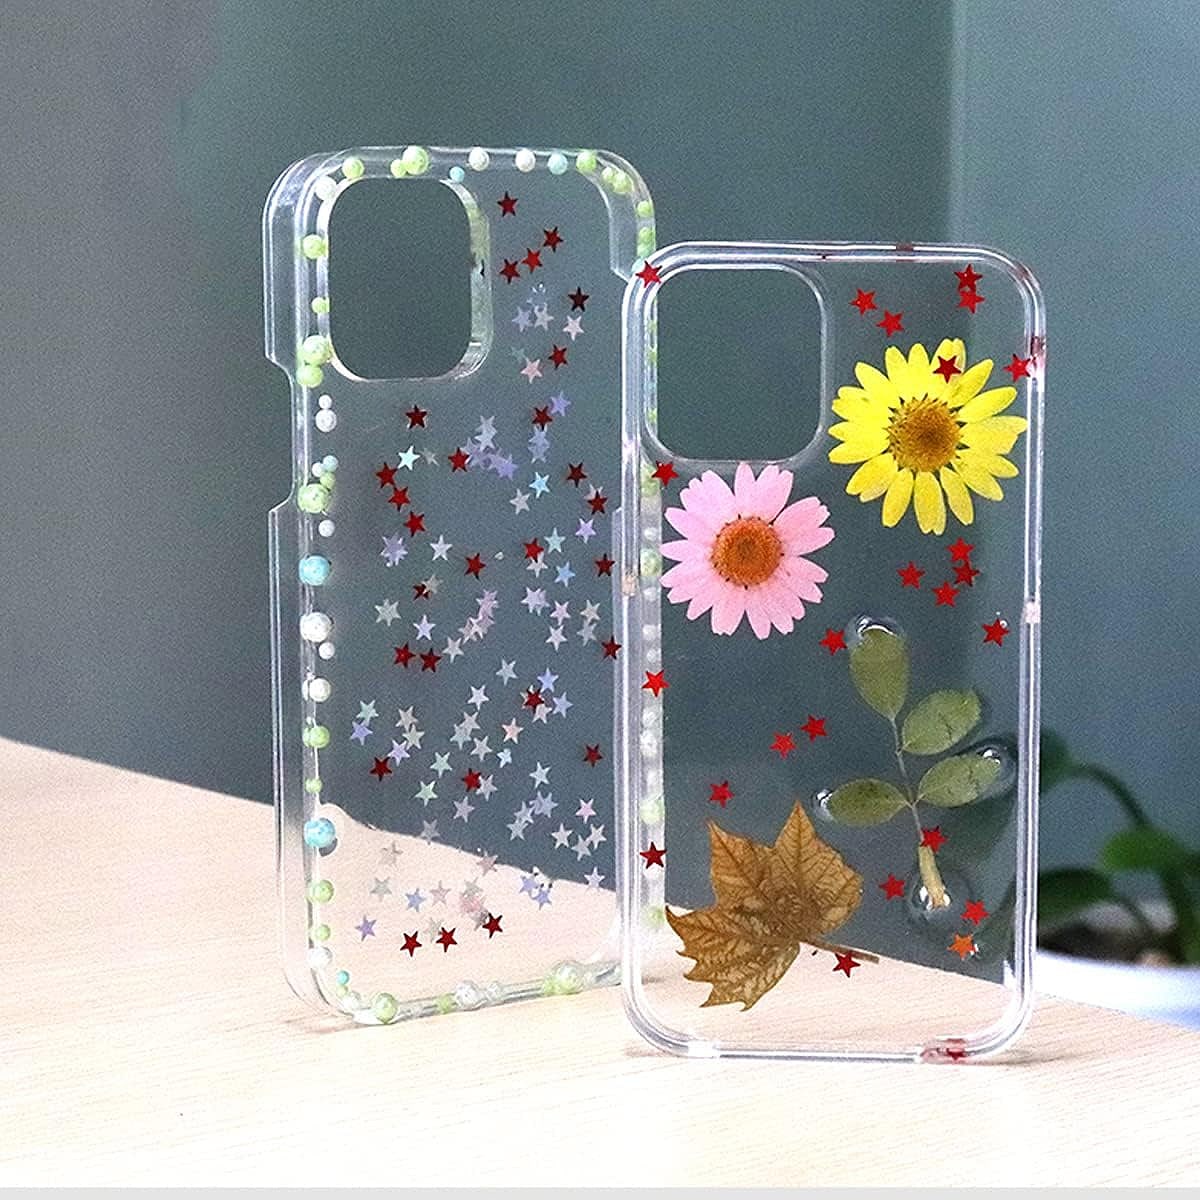 resin phone case kit flowers and stars